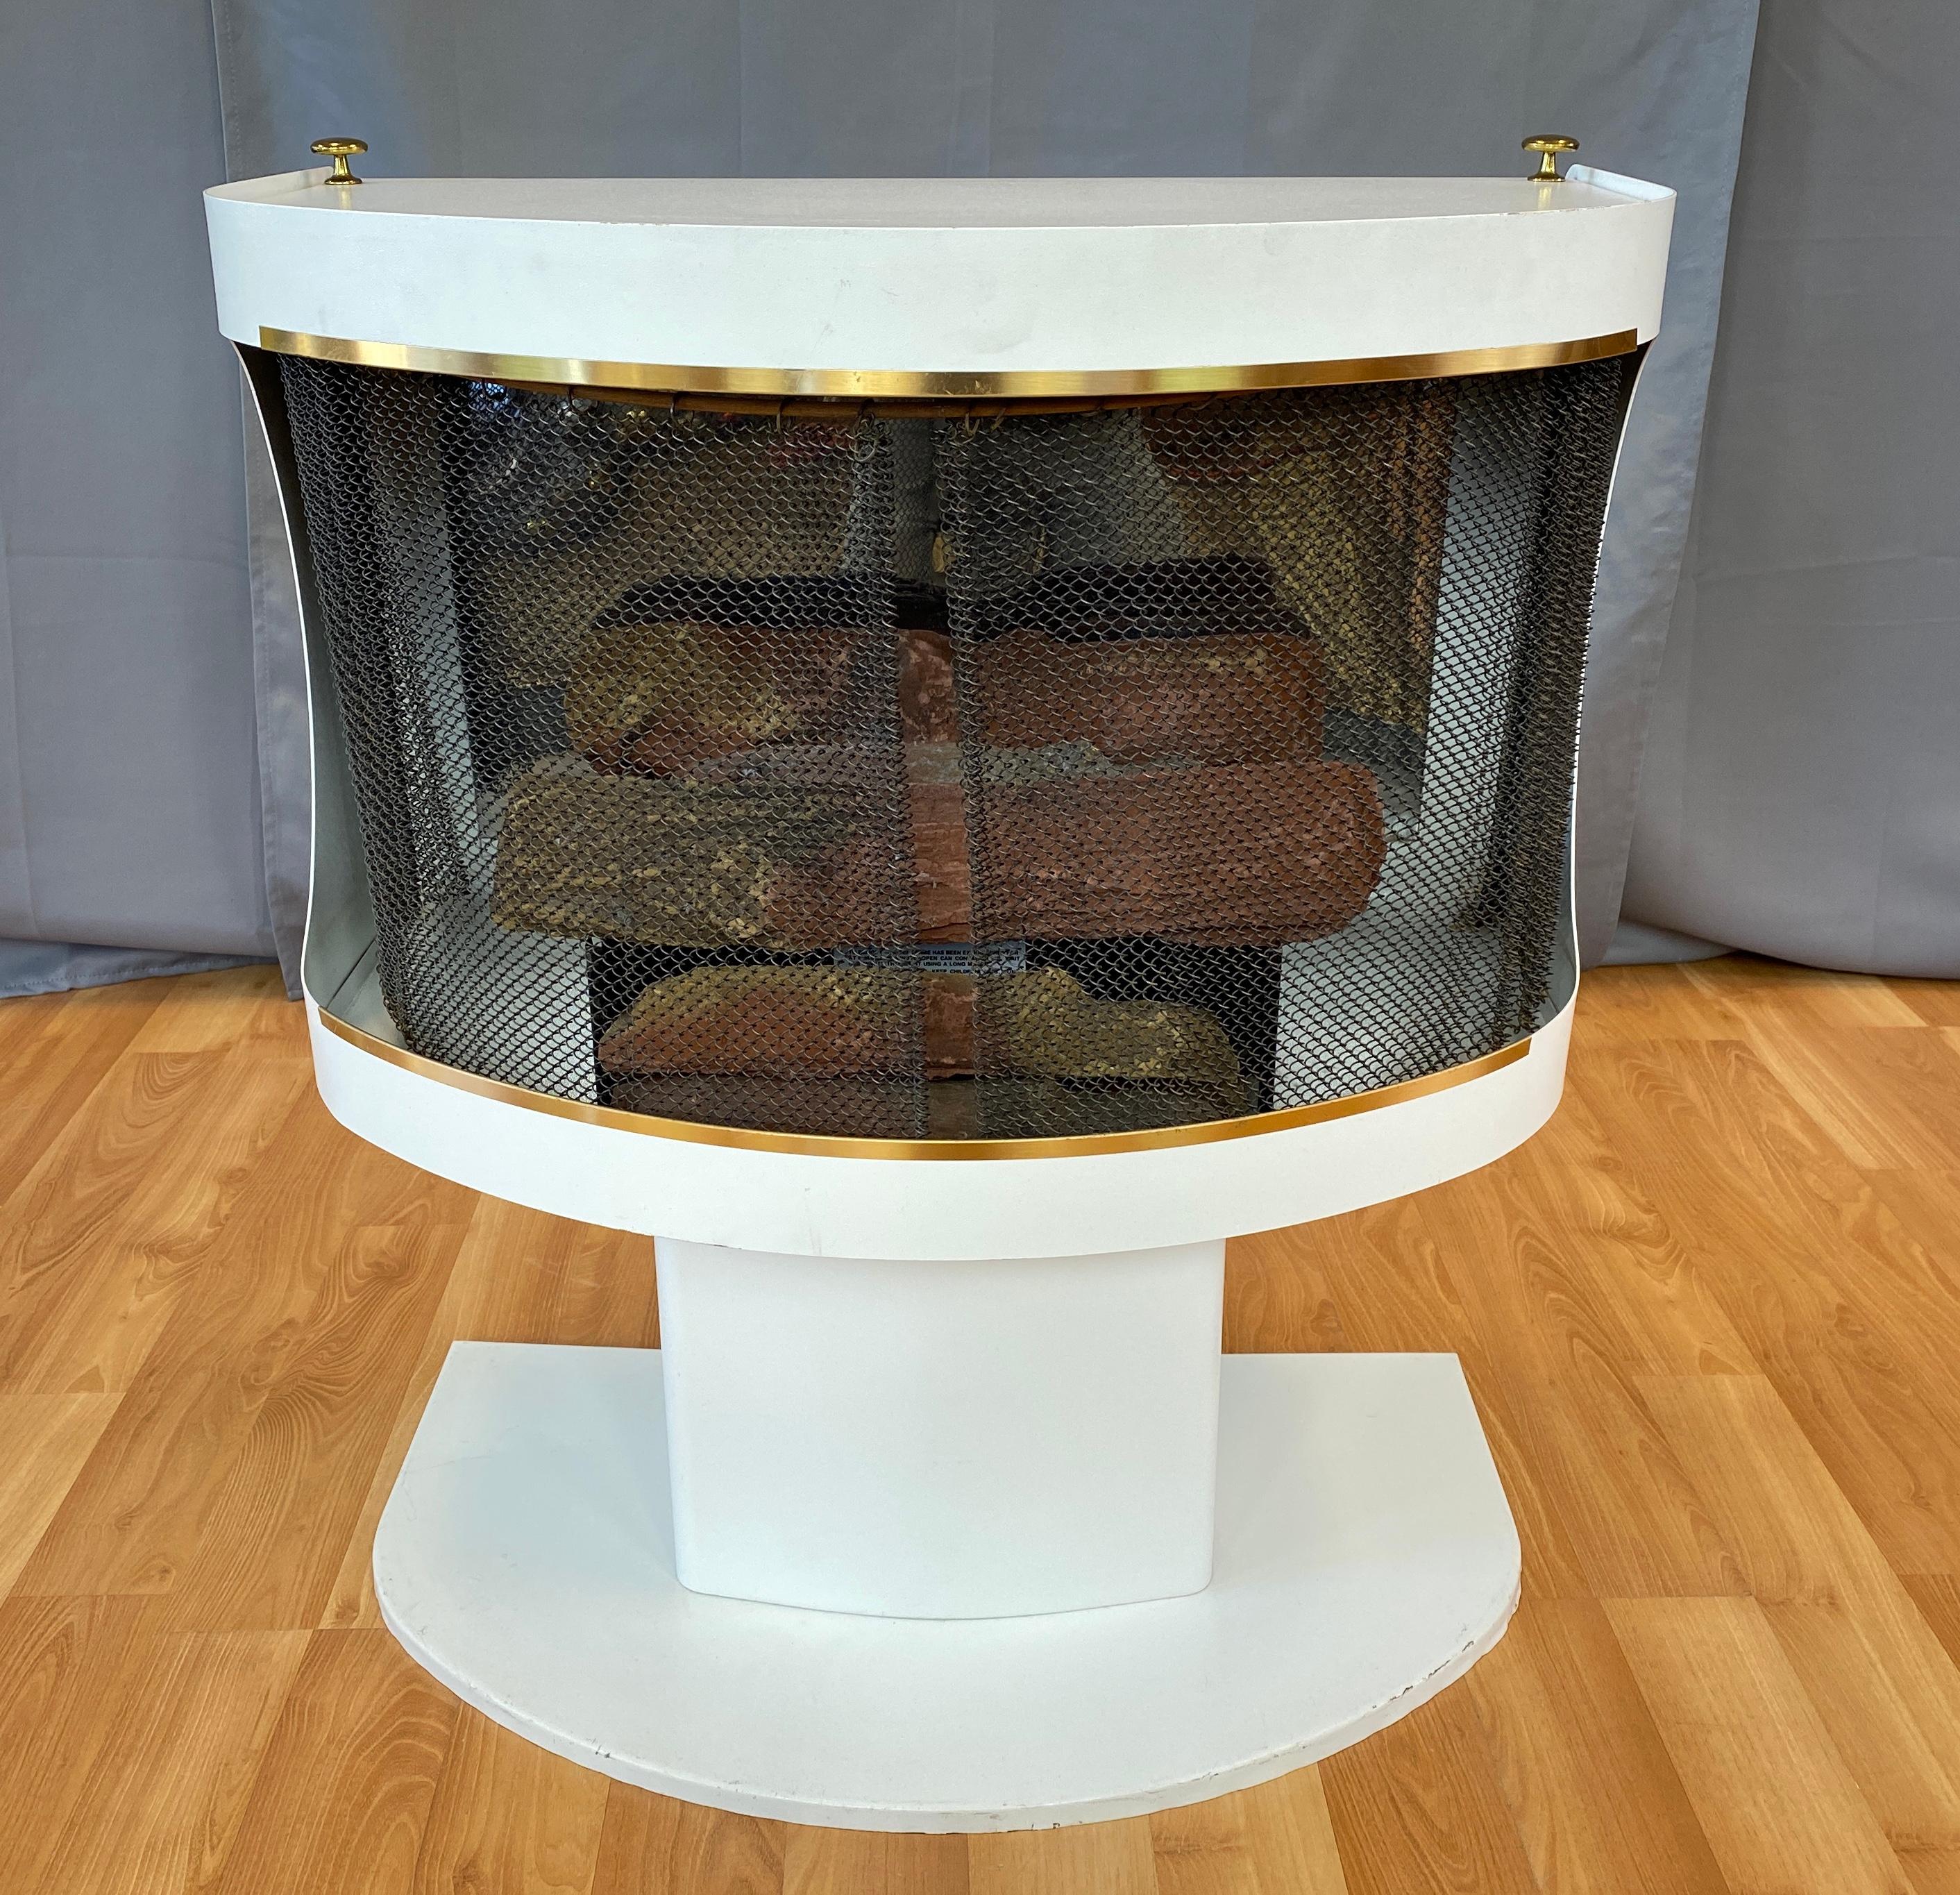 Offered here is a 1970s white free standing smokeless fireplace by Mastercraft Metal.

Main body sits on a pedestal stand, open up the sliding chain curtain, you have a burner box that would hold cans of
gel Sterno fuel, you cover that black box